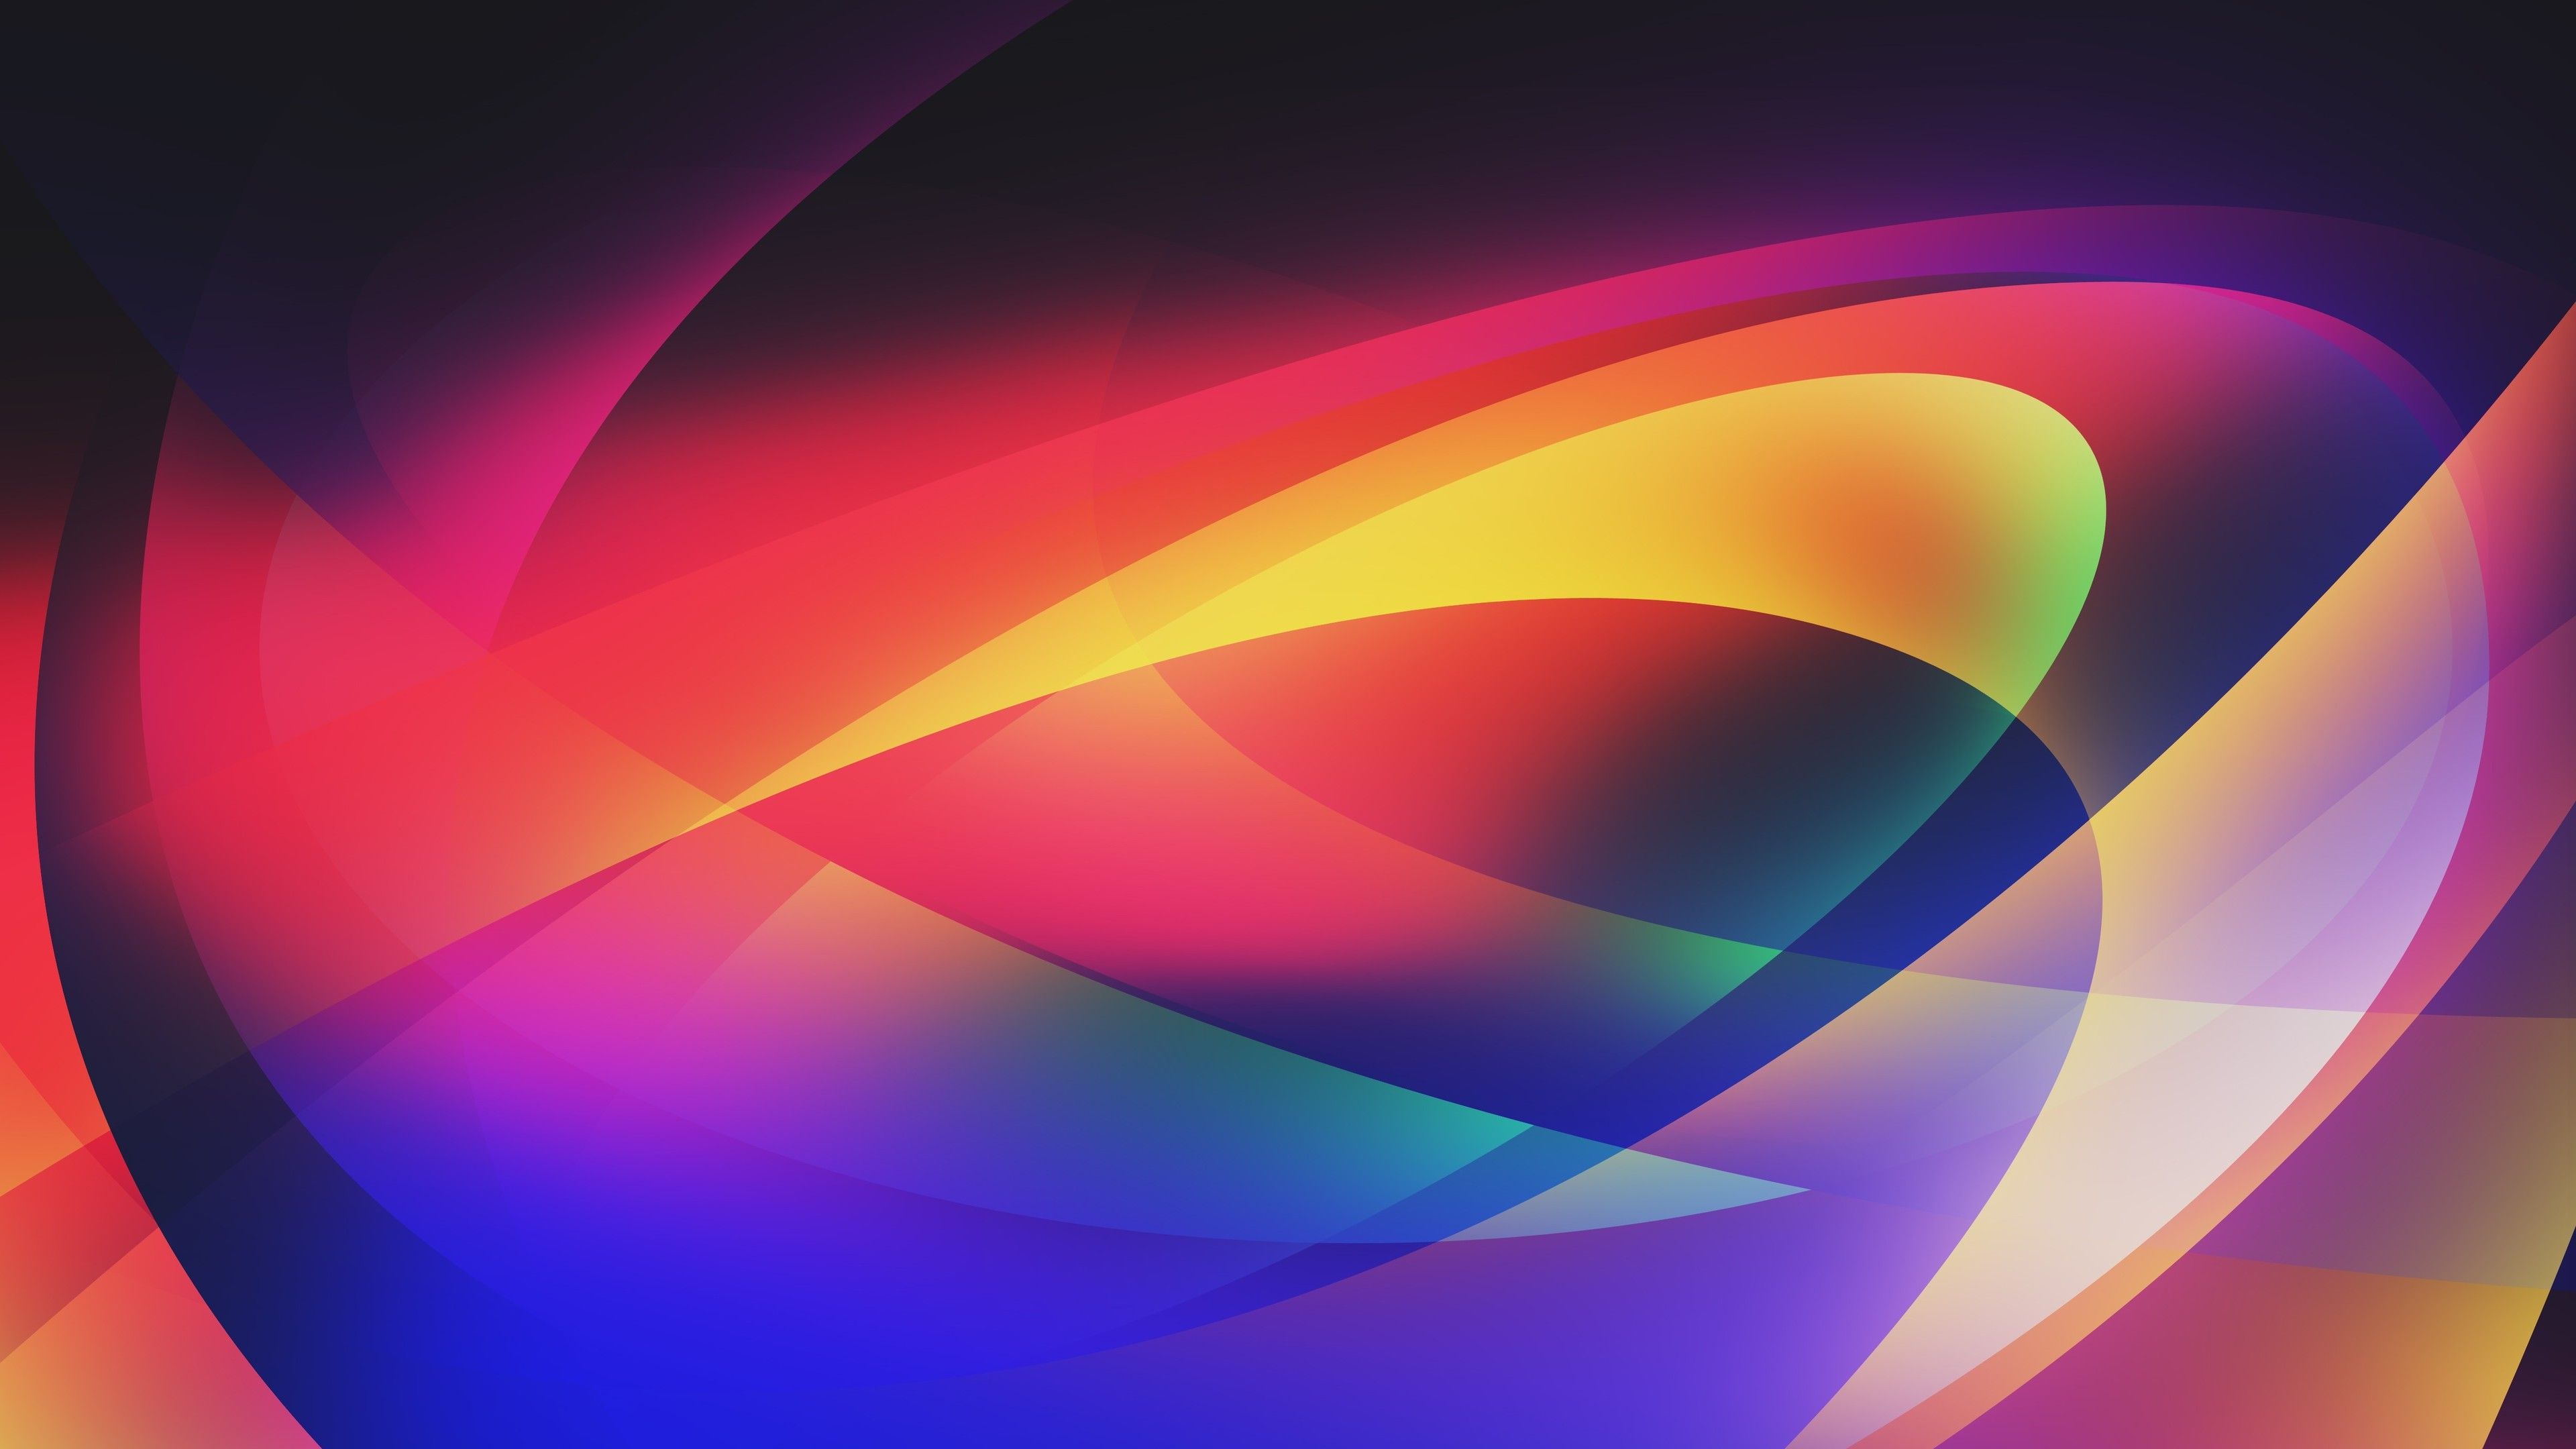 Colorful Abstract 4k HD Wallpapers - Wallpaper Cave